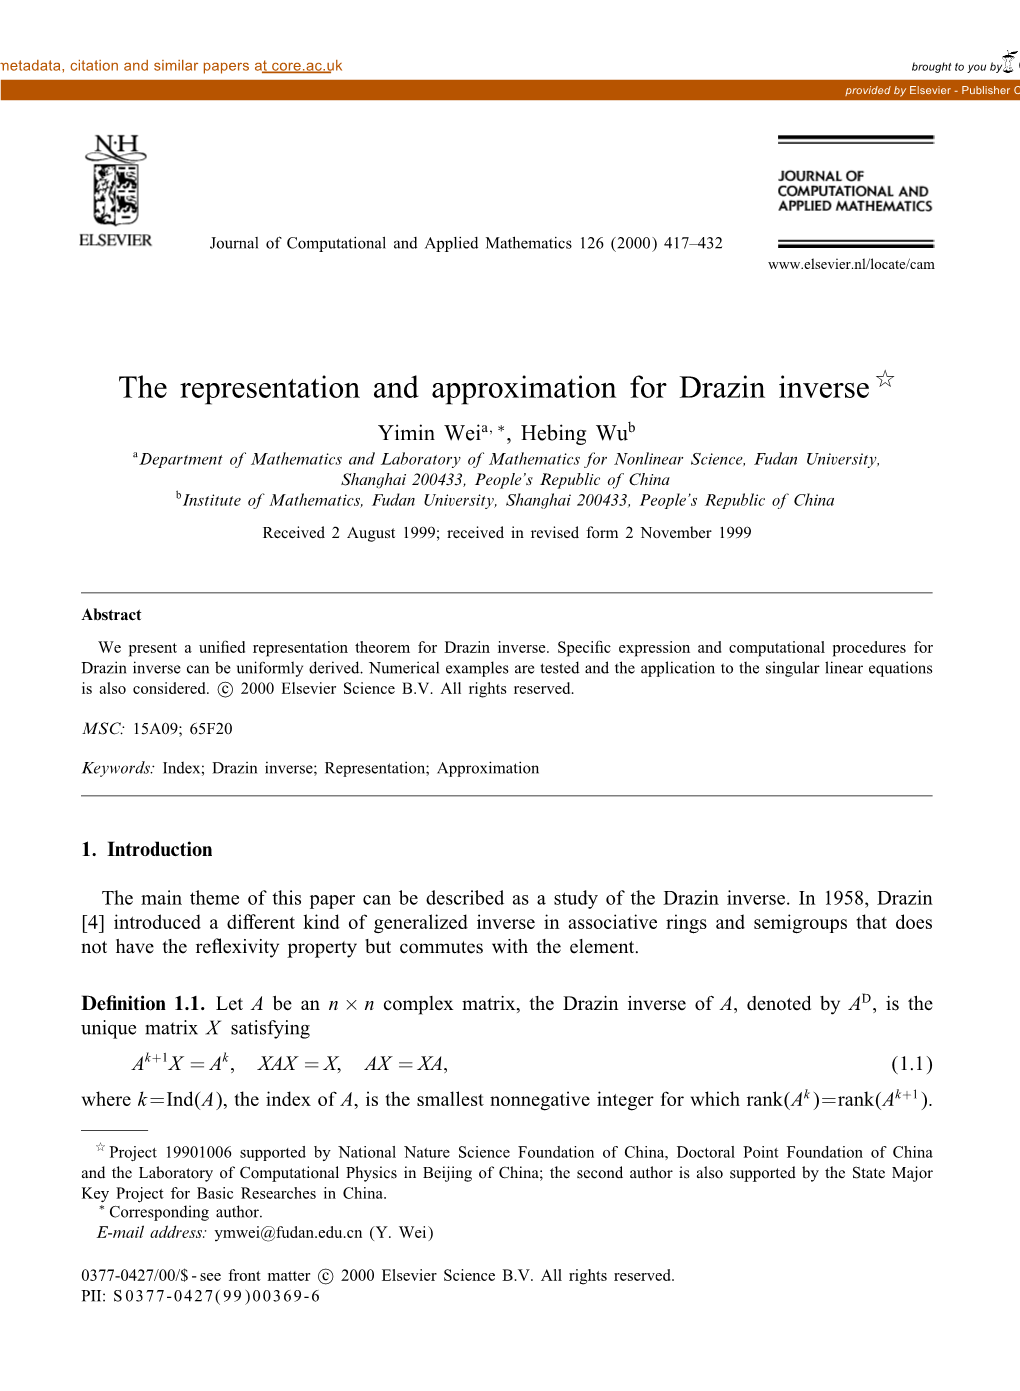 The Representation and Approximation for Drazin Inverse